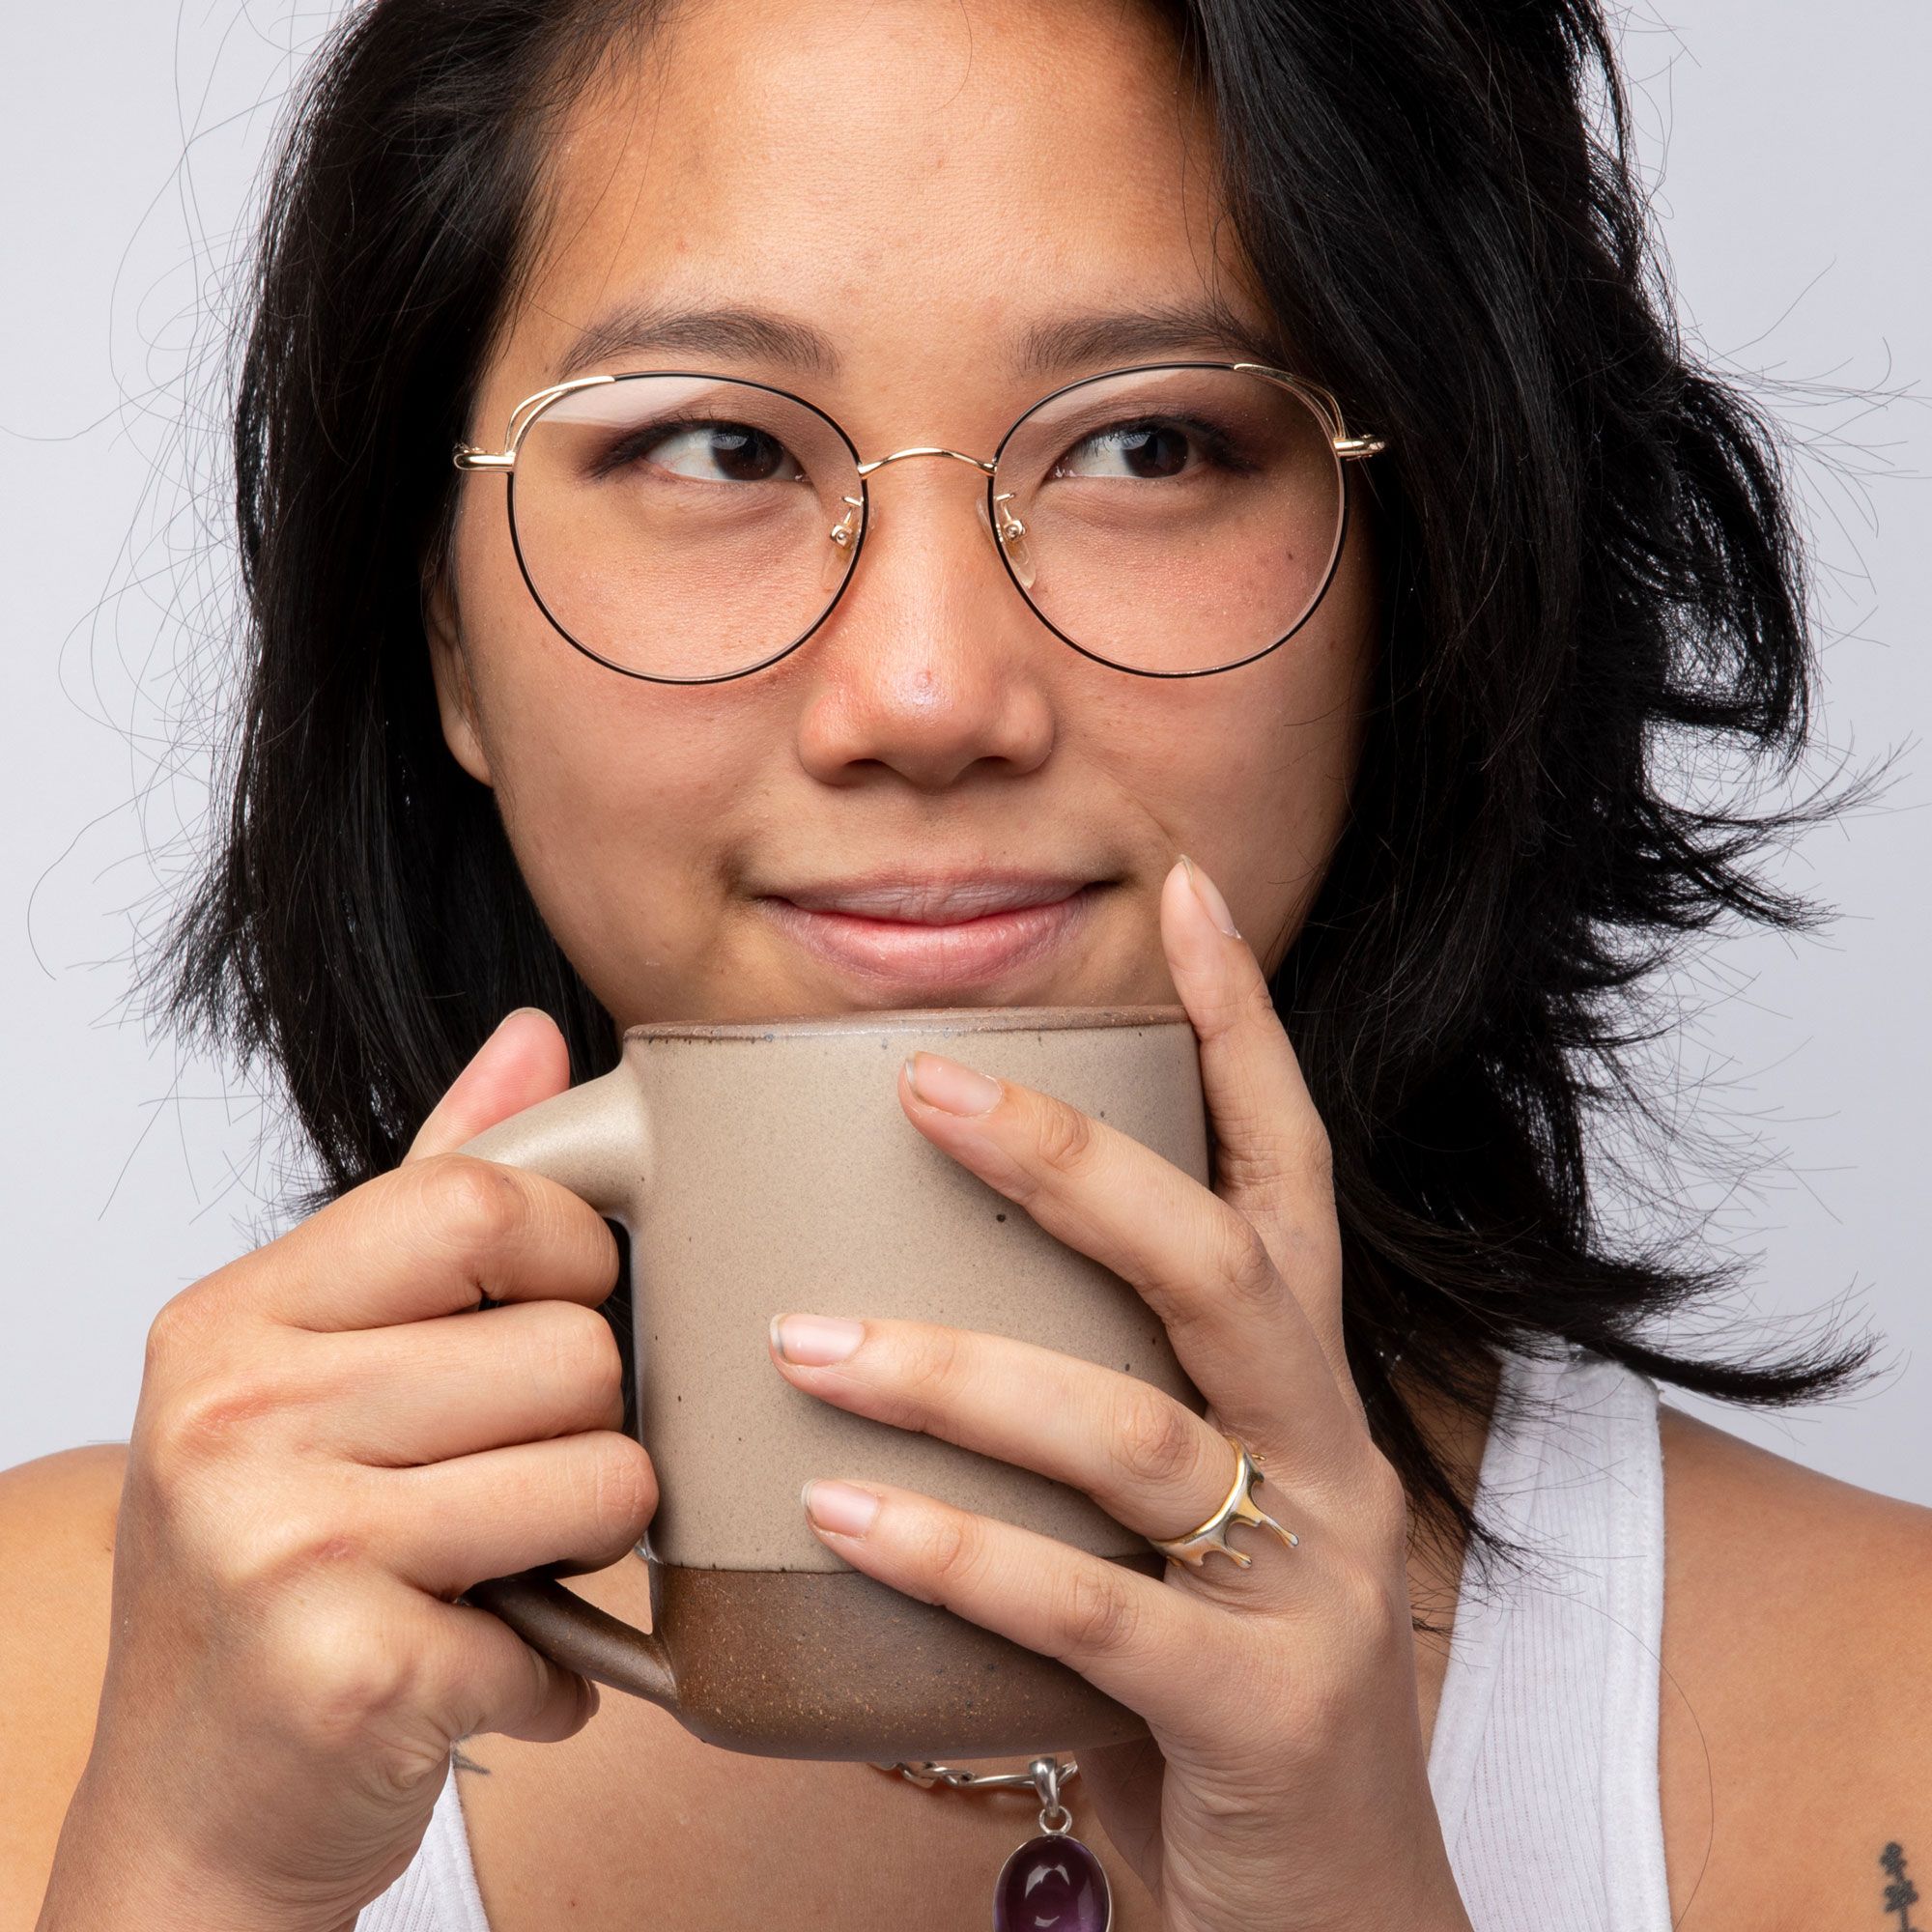 A person holding a medium sized ceramic mug close to their face. The mug is in a warm pale brown color featuring iron speckles and unglazed rim and bottom base.